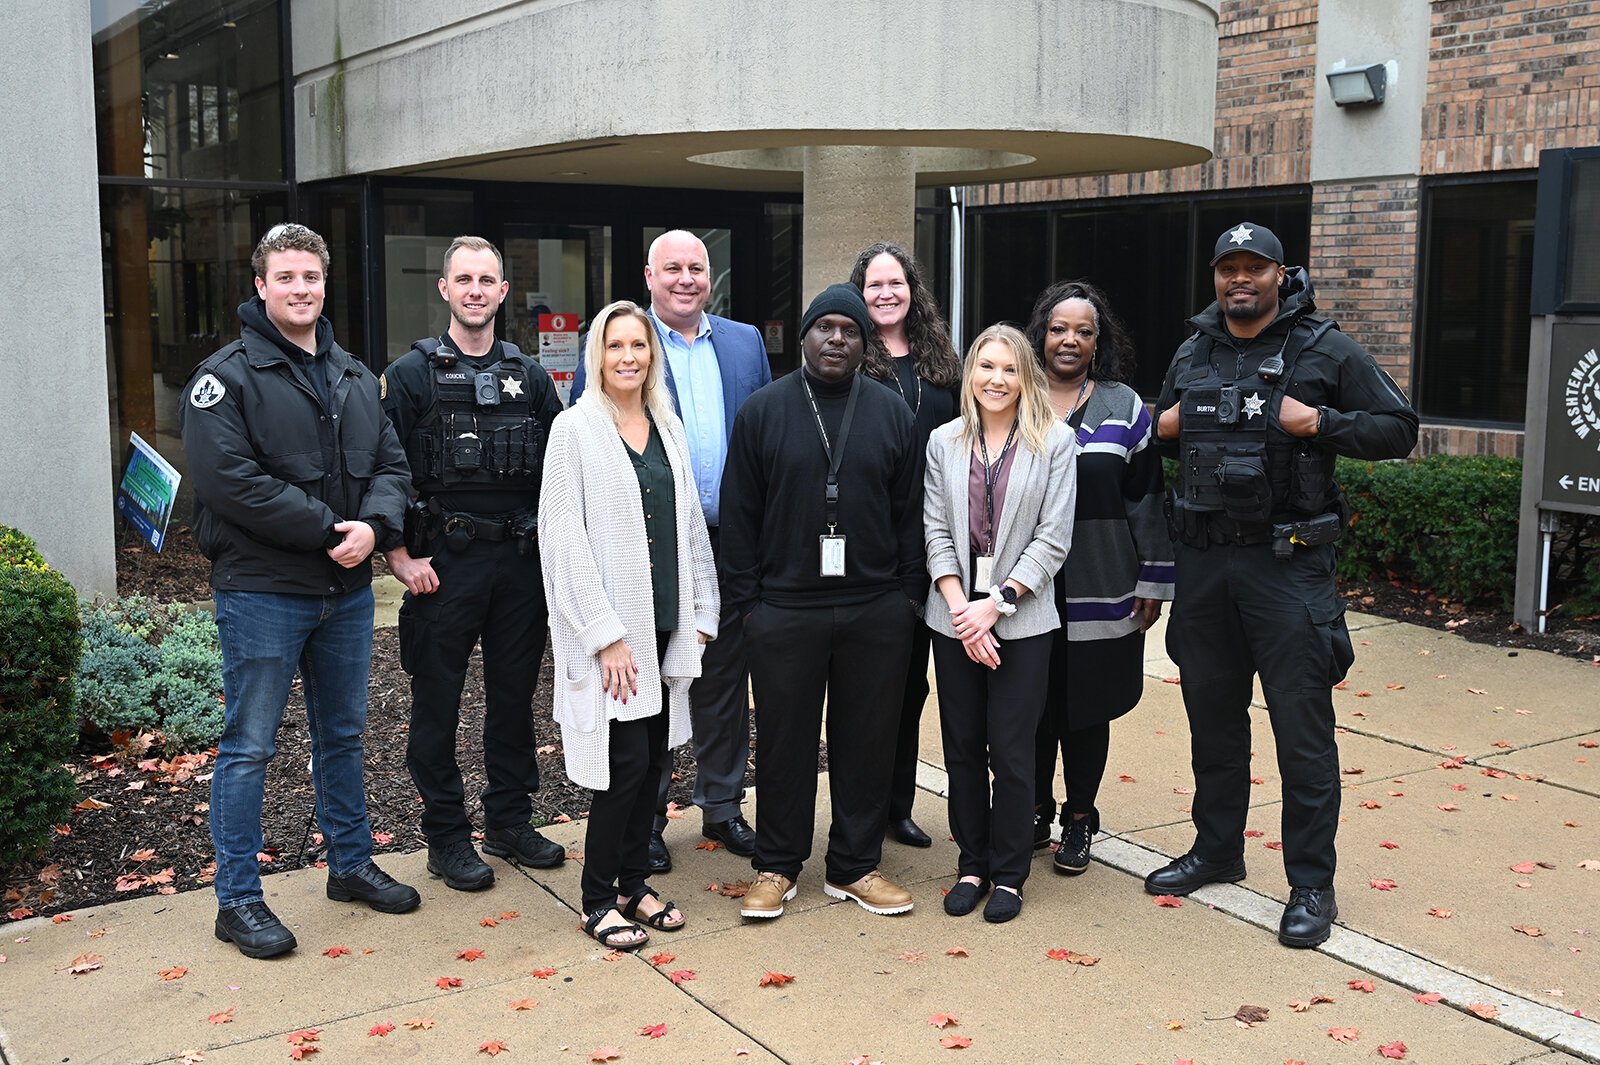 The Law Enforcement Assisted Diversion and Deflection (LEADD) team includes representatives of Washtenaw County's Sheriff's Office, Community Mental Health, Prosecutor's Office, and Public Defender's Office, as well as McLain and Winters Law Firm.